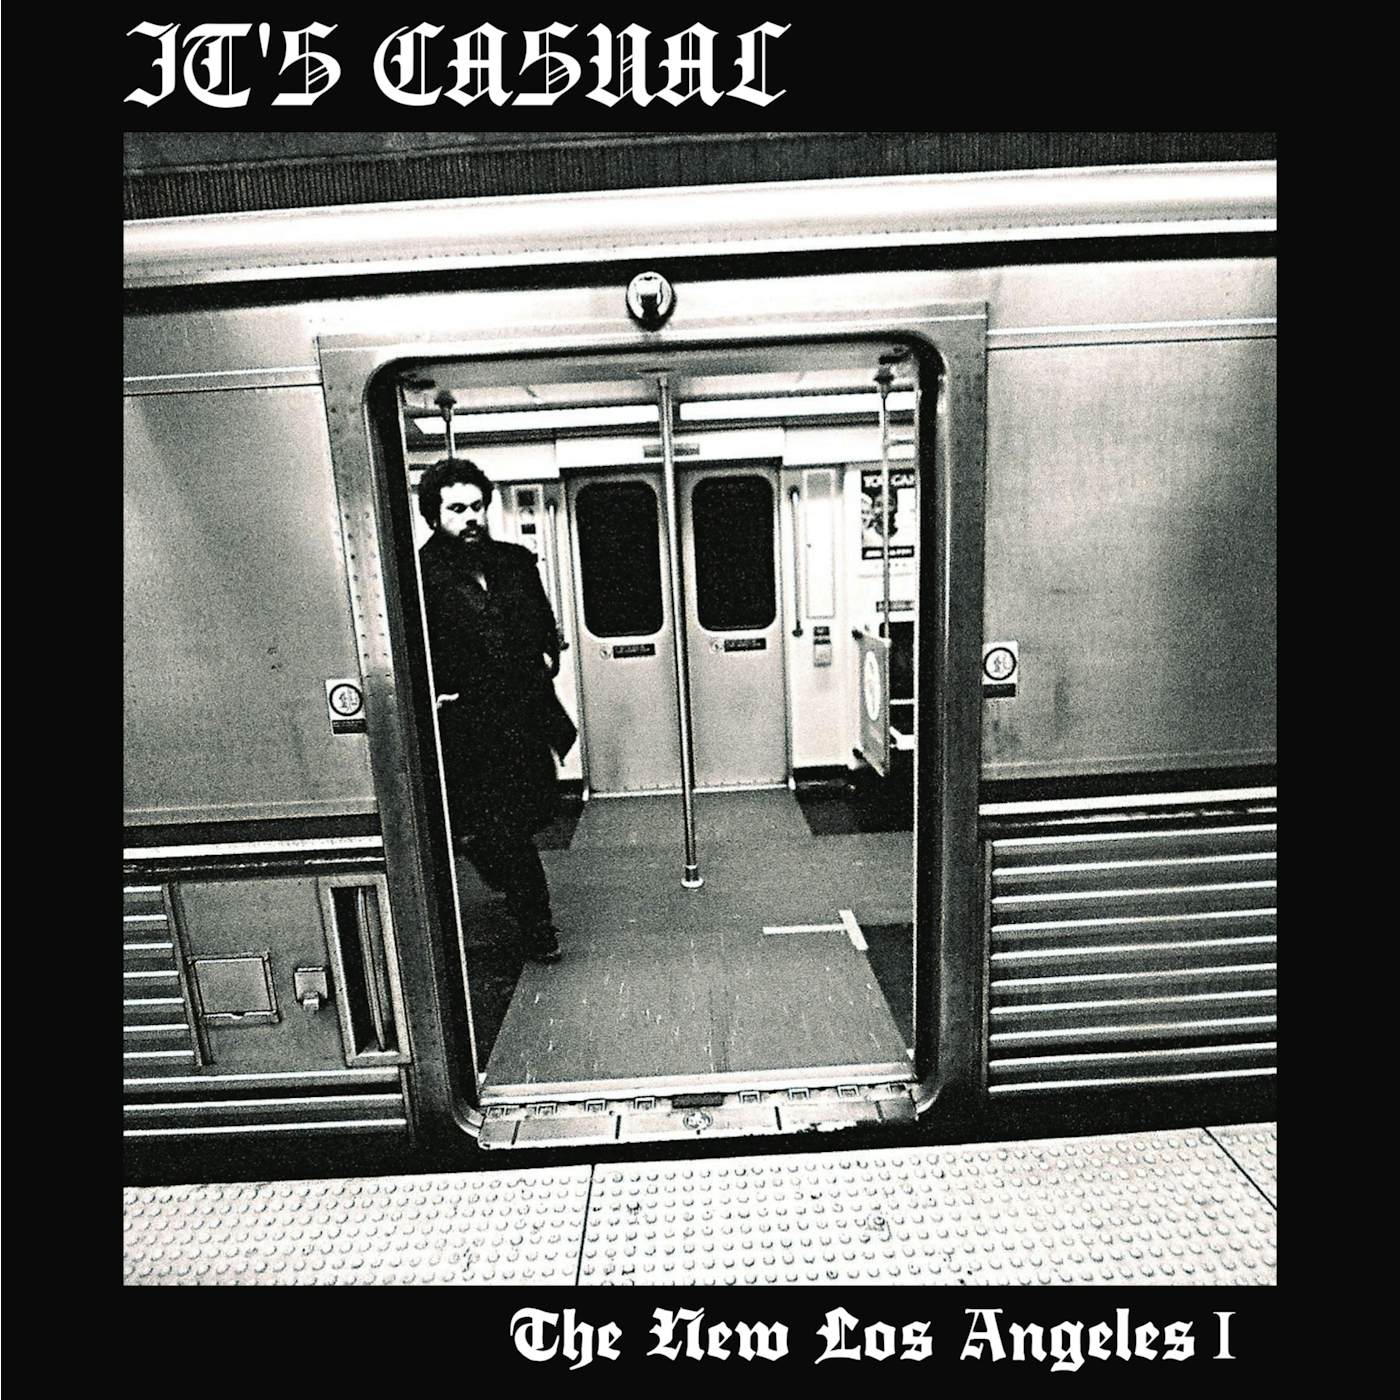 It's Casual NEW LOS ANGELES I: THROUGH THE EYES OF A BUS RIDER Vinyl Record